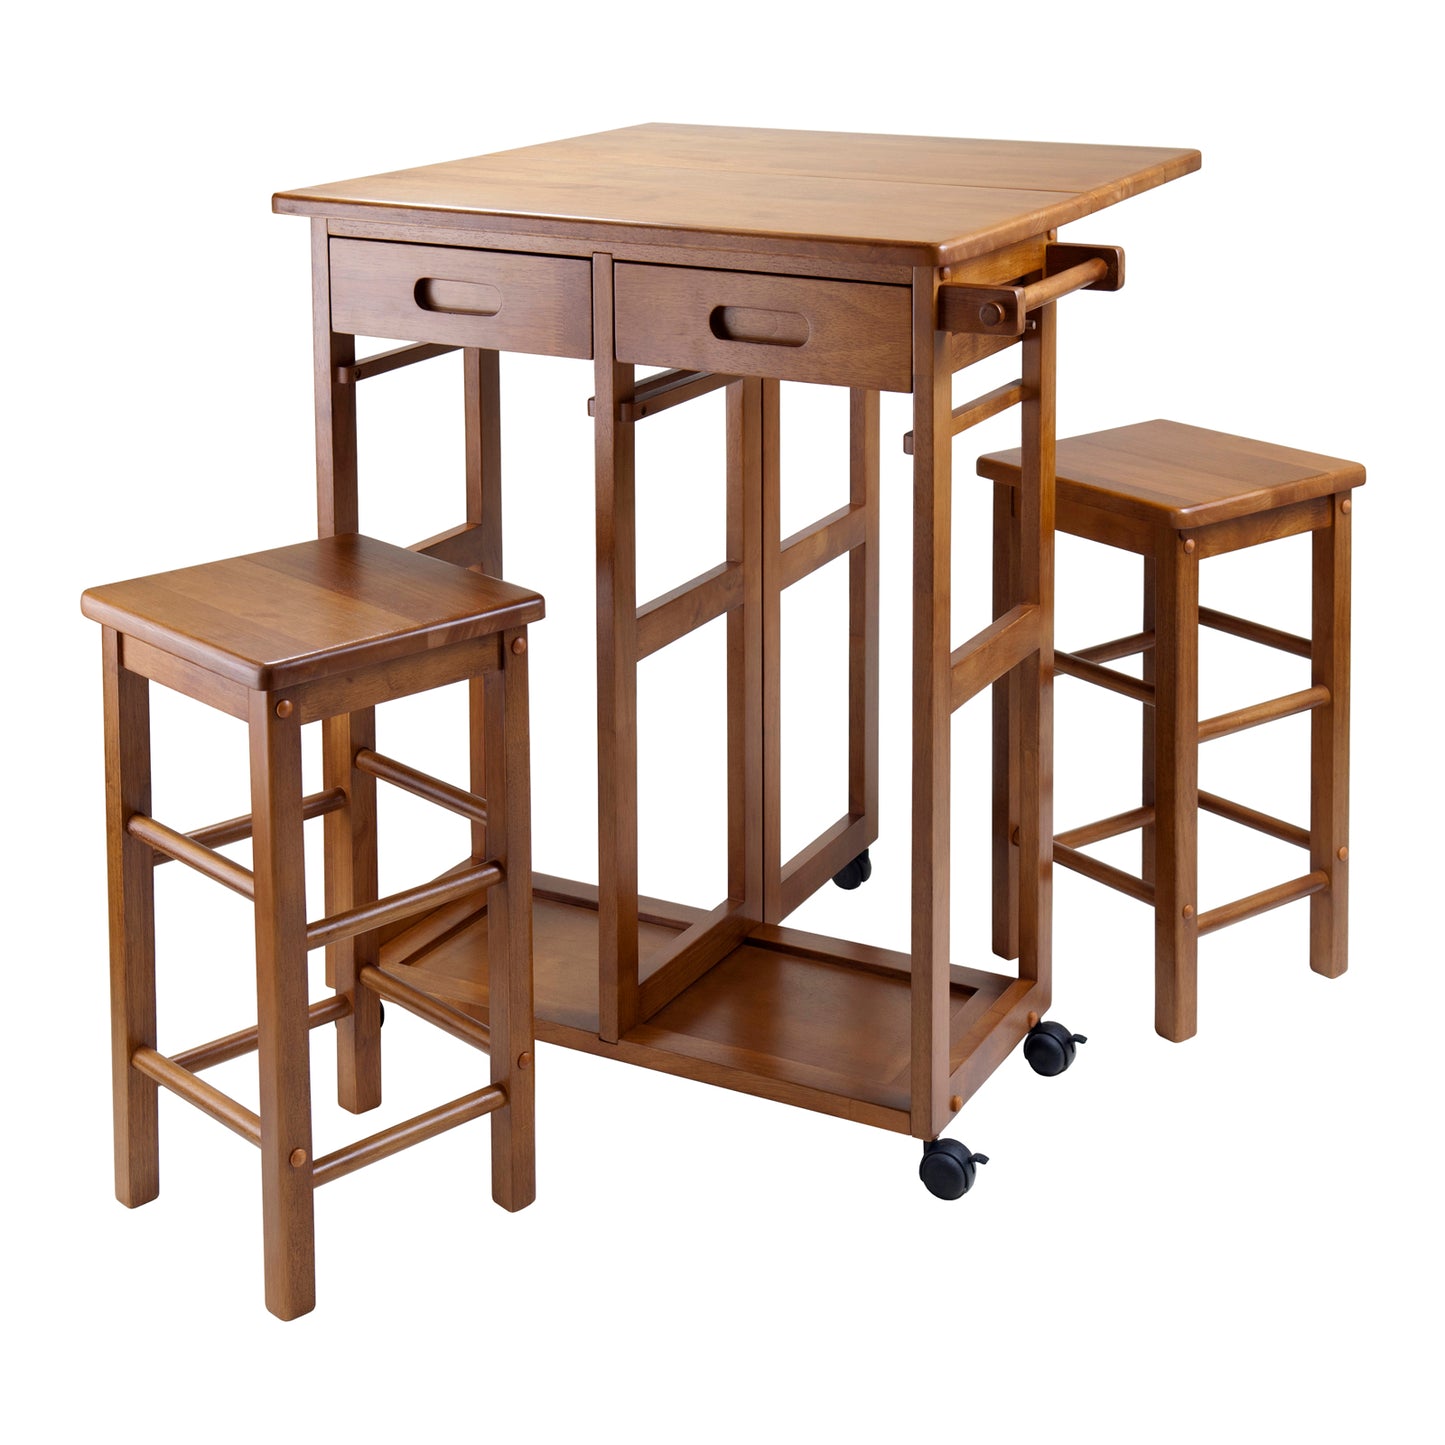 Suzanne 3-Pc Space Saver with Tuck-away Stools, Teak